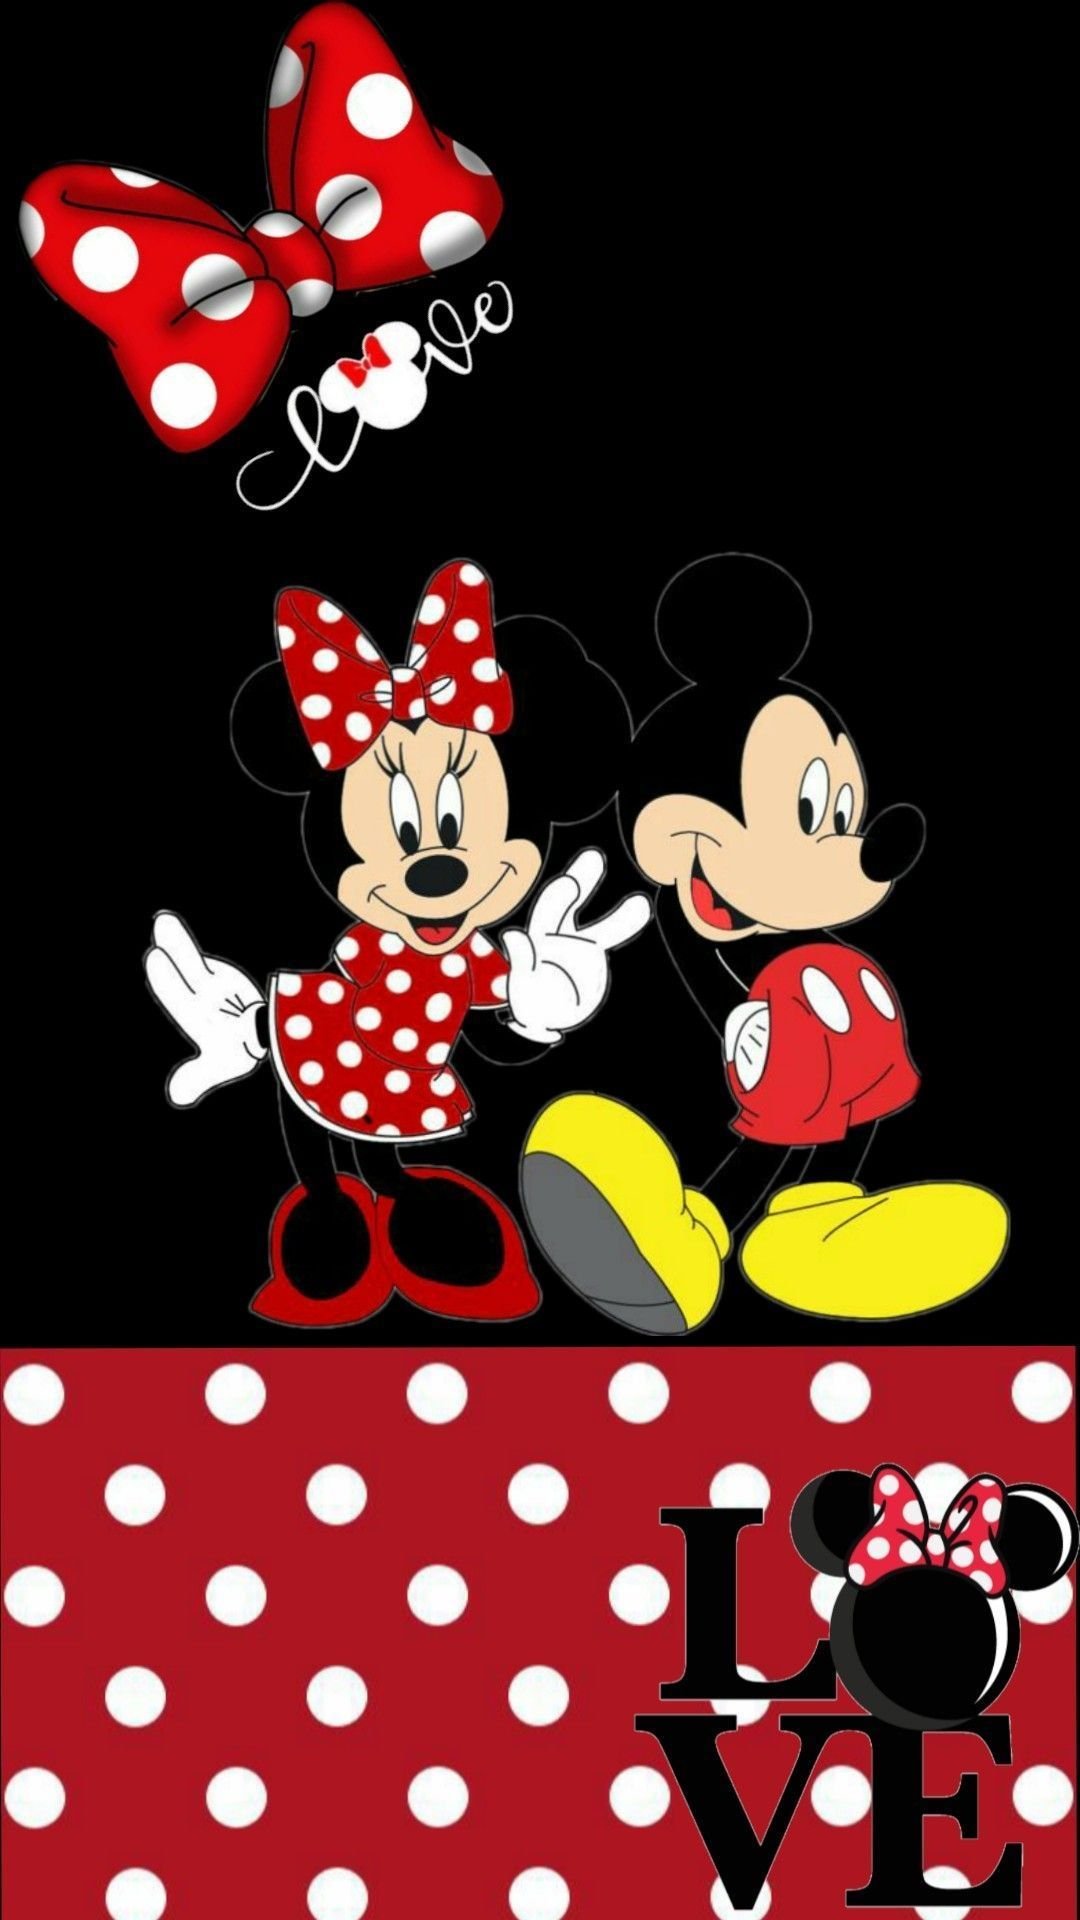 Disney Junior Disney Mickey Mouse Minnie Photo Mural Wallpaper for  Children's Room, Paper, Multi-Colour, 0.1 x 160 x 115 cm : Amazon.co.uk:  Baby Products